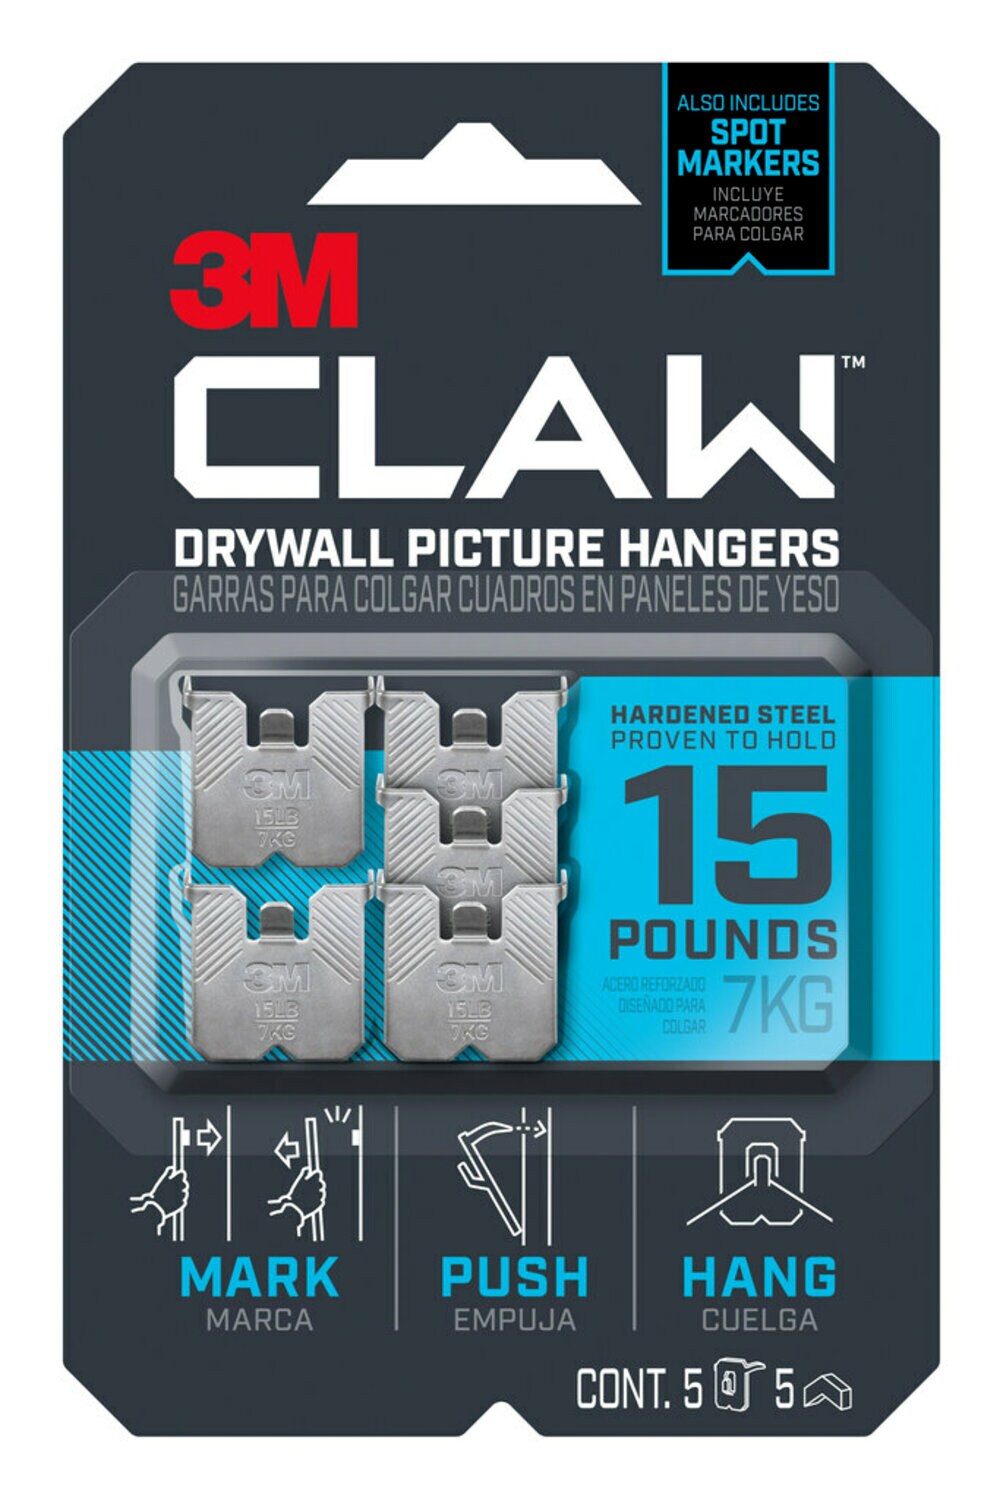 7100220647 - 3M CLAW Drywall Picture Hanger 15 lb with Temporary Spot Marker 3PH15M-5ES-ALT, 5 hangers, 5 markers